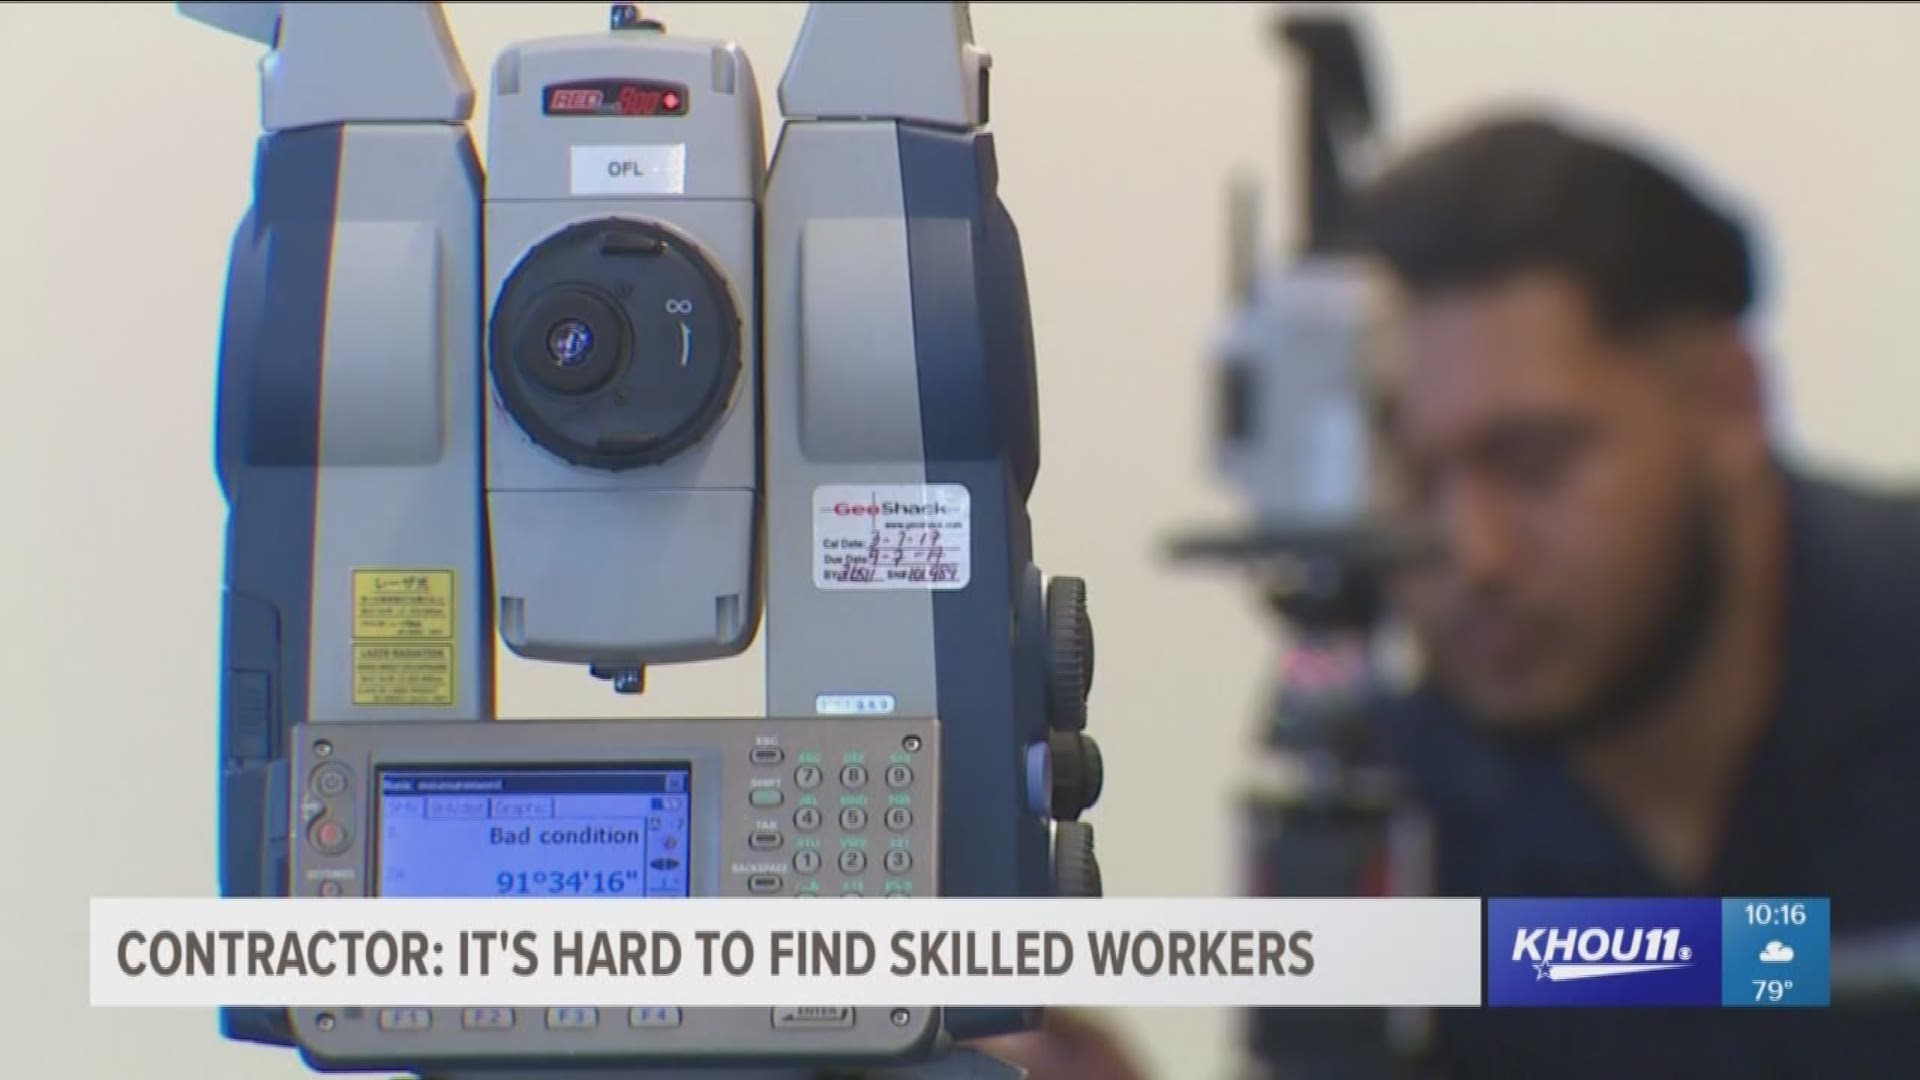 Contractors say they're having trouble finding enough skilled workers to get the job done. Some say the shortage could hurt our economy.